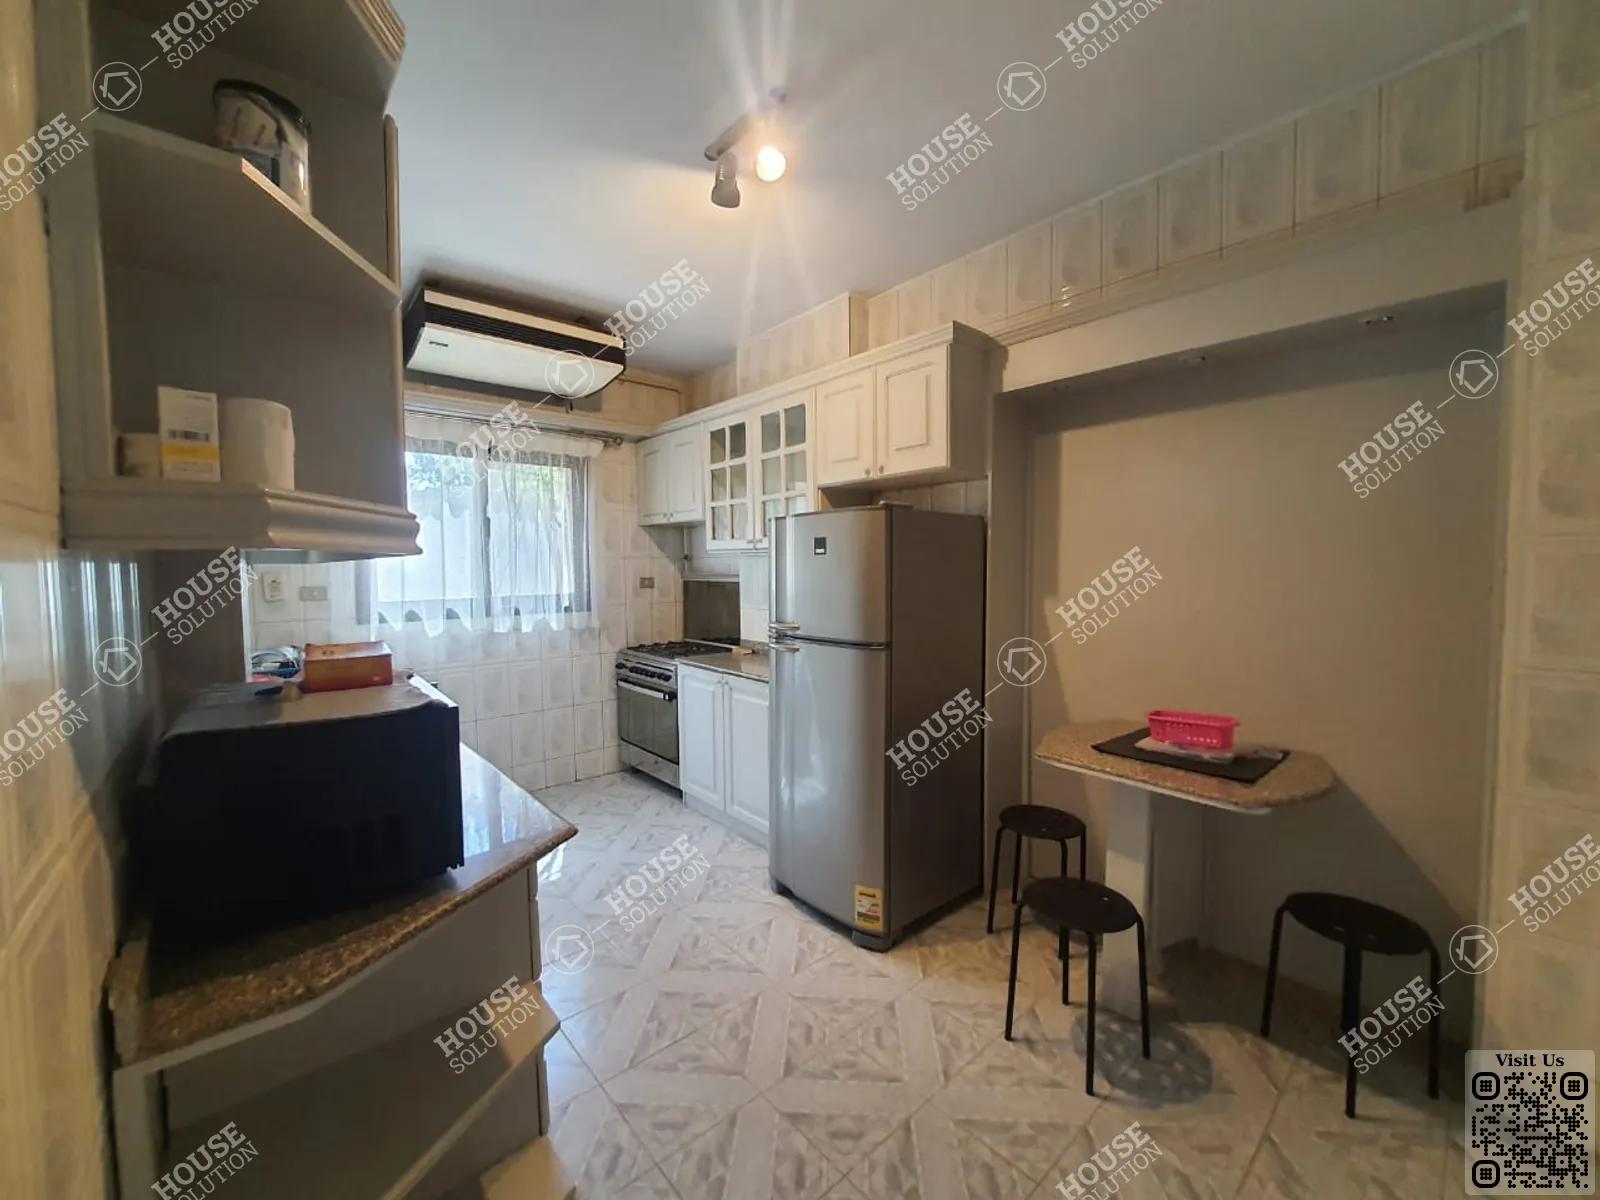 KITCHEN  @ Apartments For Rent In Maadi Maadi Sarayat Area: 220 m² consists of 3 Bedrooms 3 Bathrooms Modern furnished 5 stars #4948-2